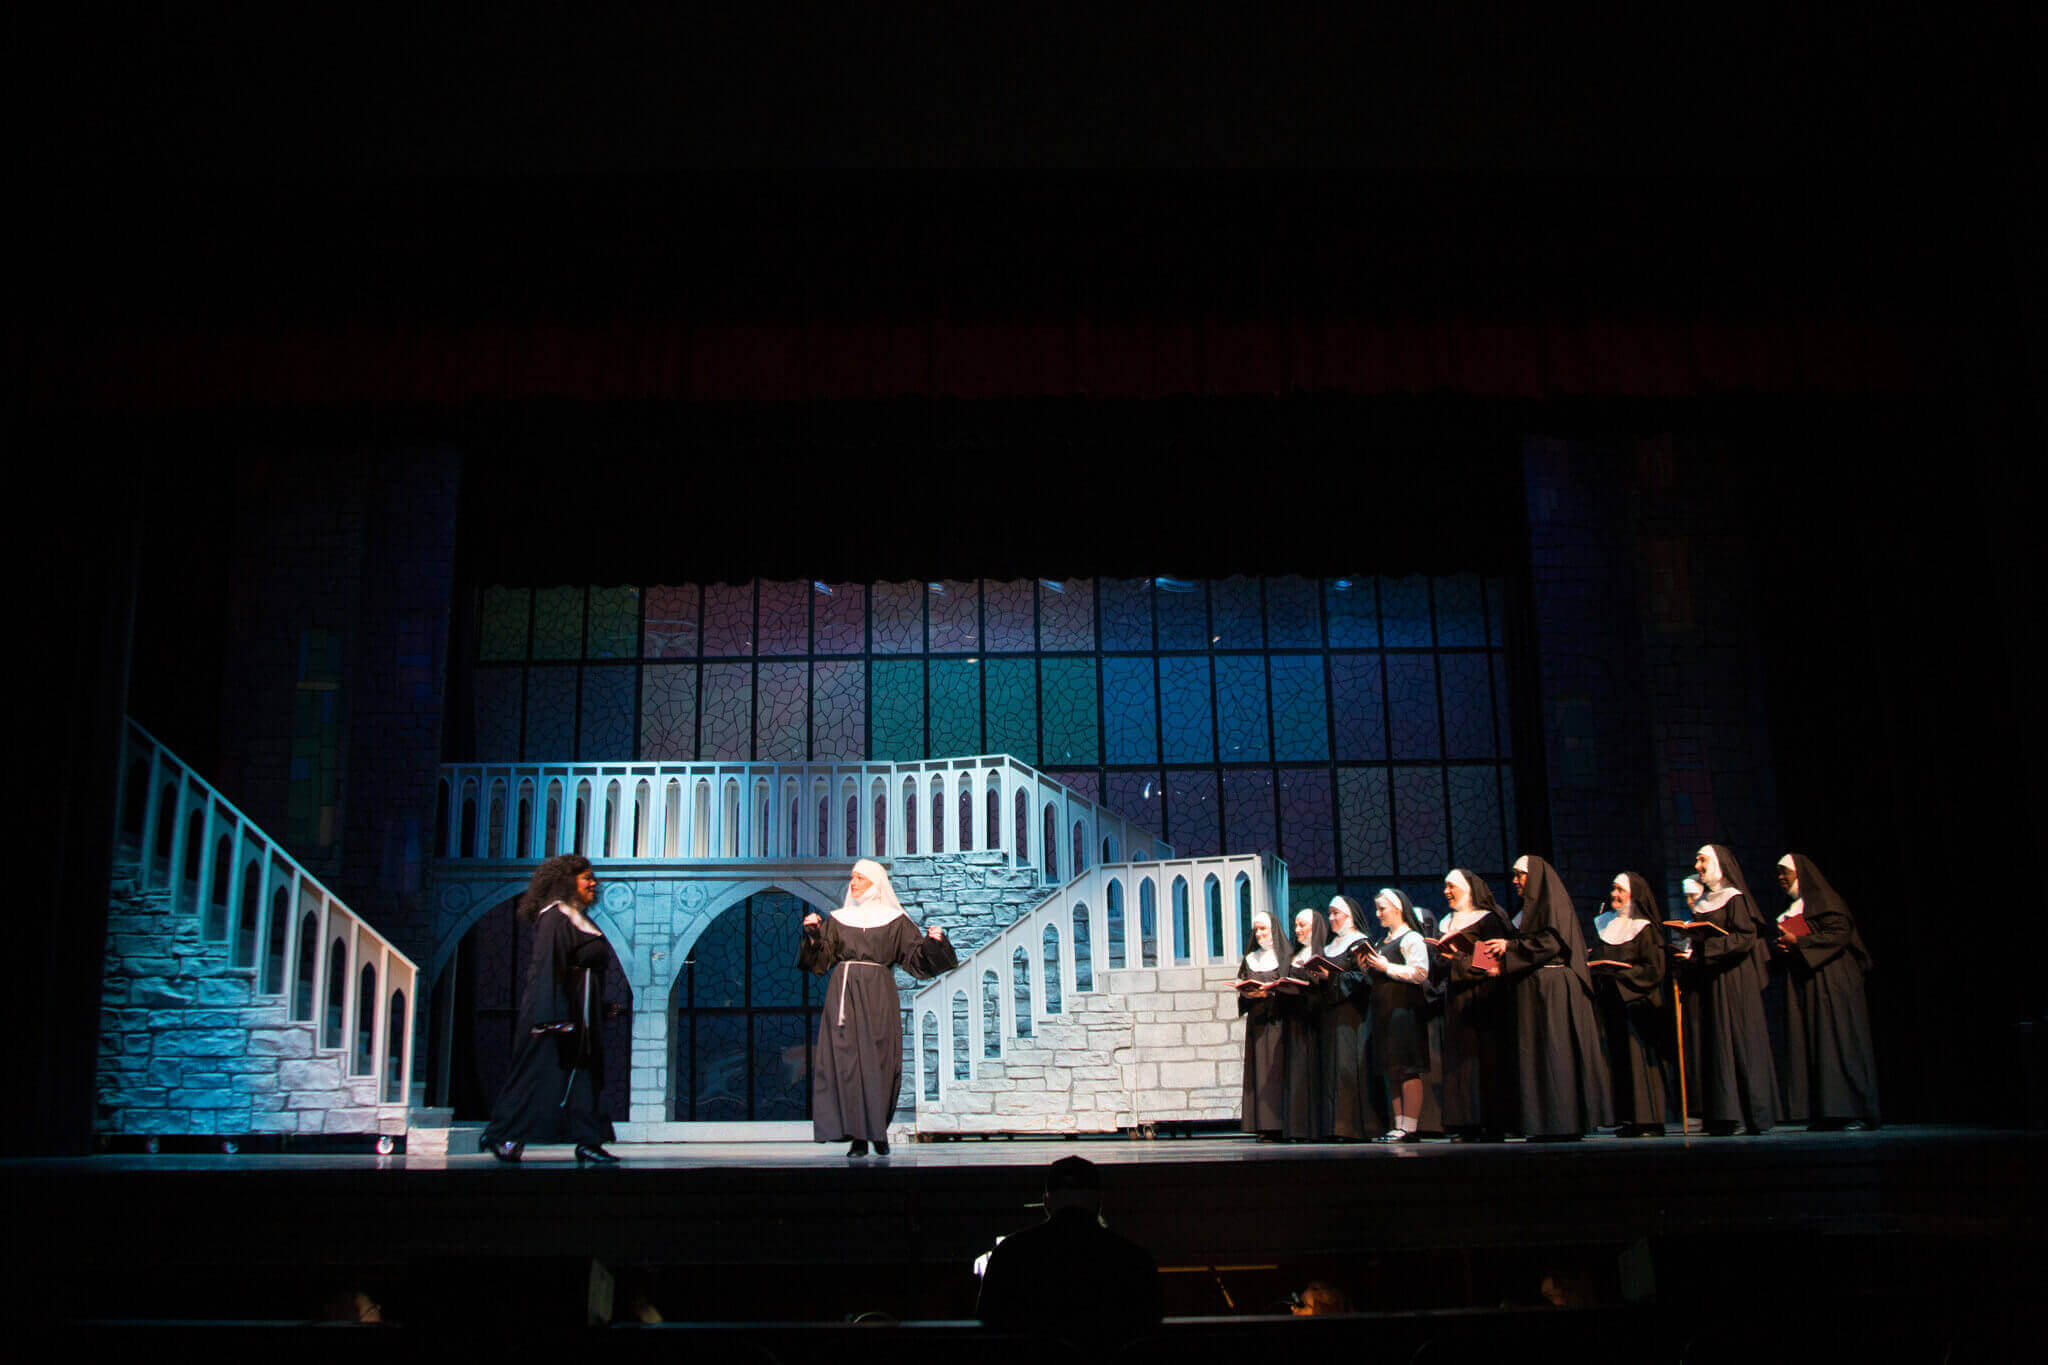 TJ Costume - Sister Act Costume Rental pictures - Stagecraft Theatrical